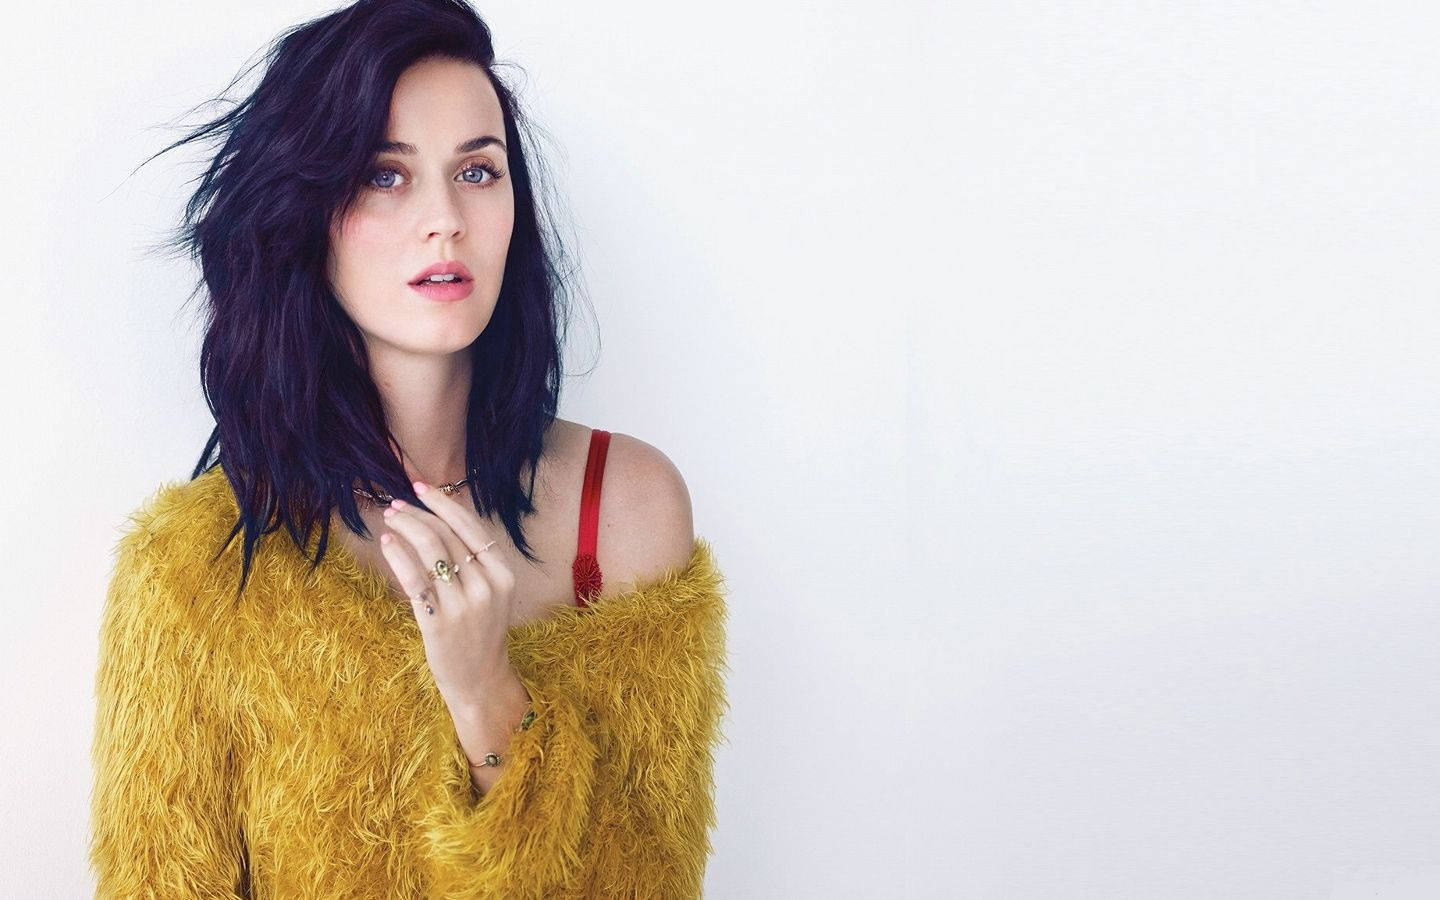 Katy Perry Looking Stylish In A Yellow Fur Shirt